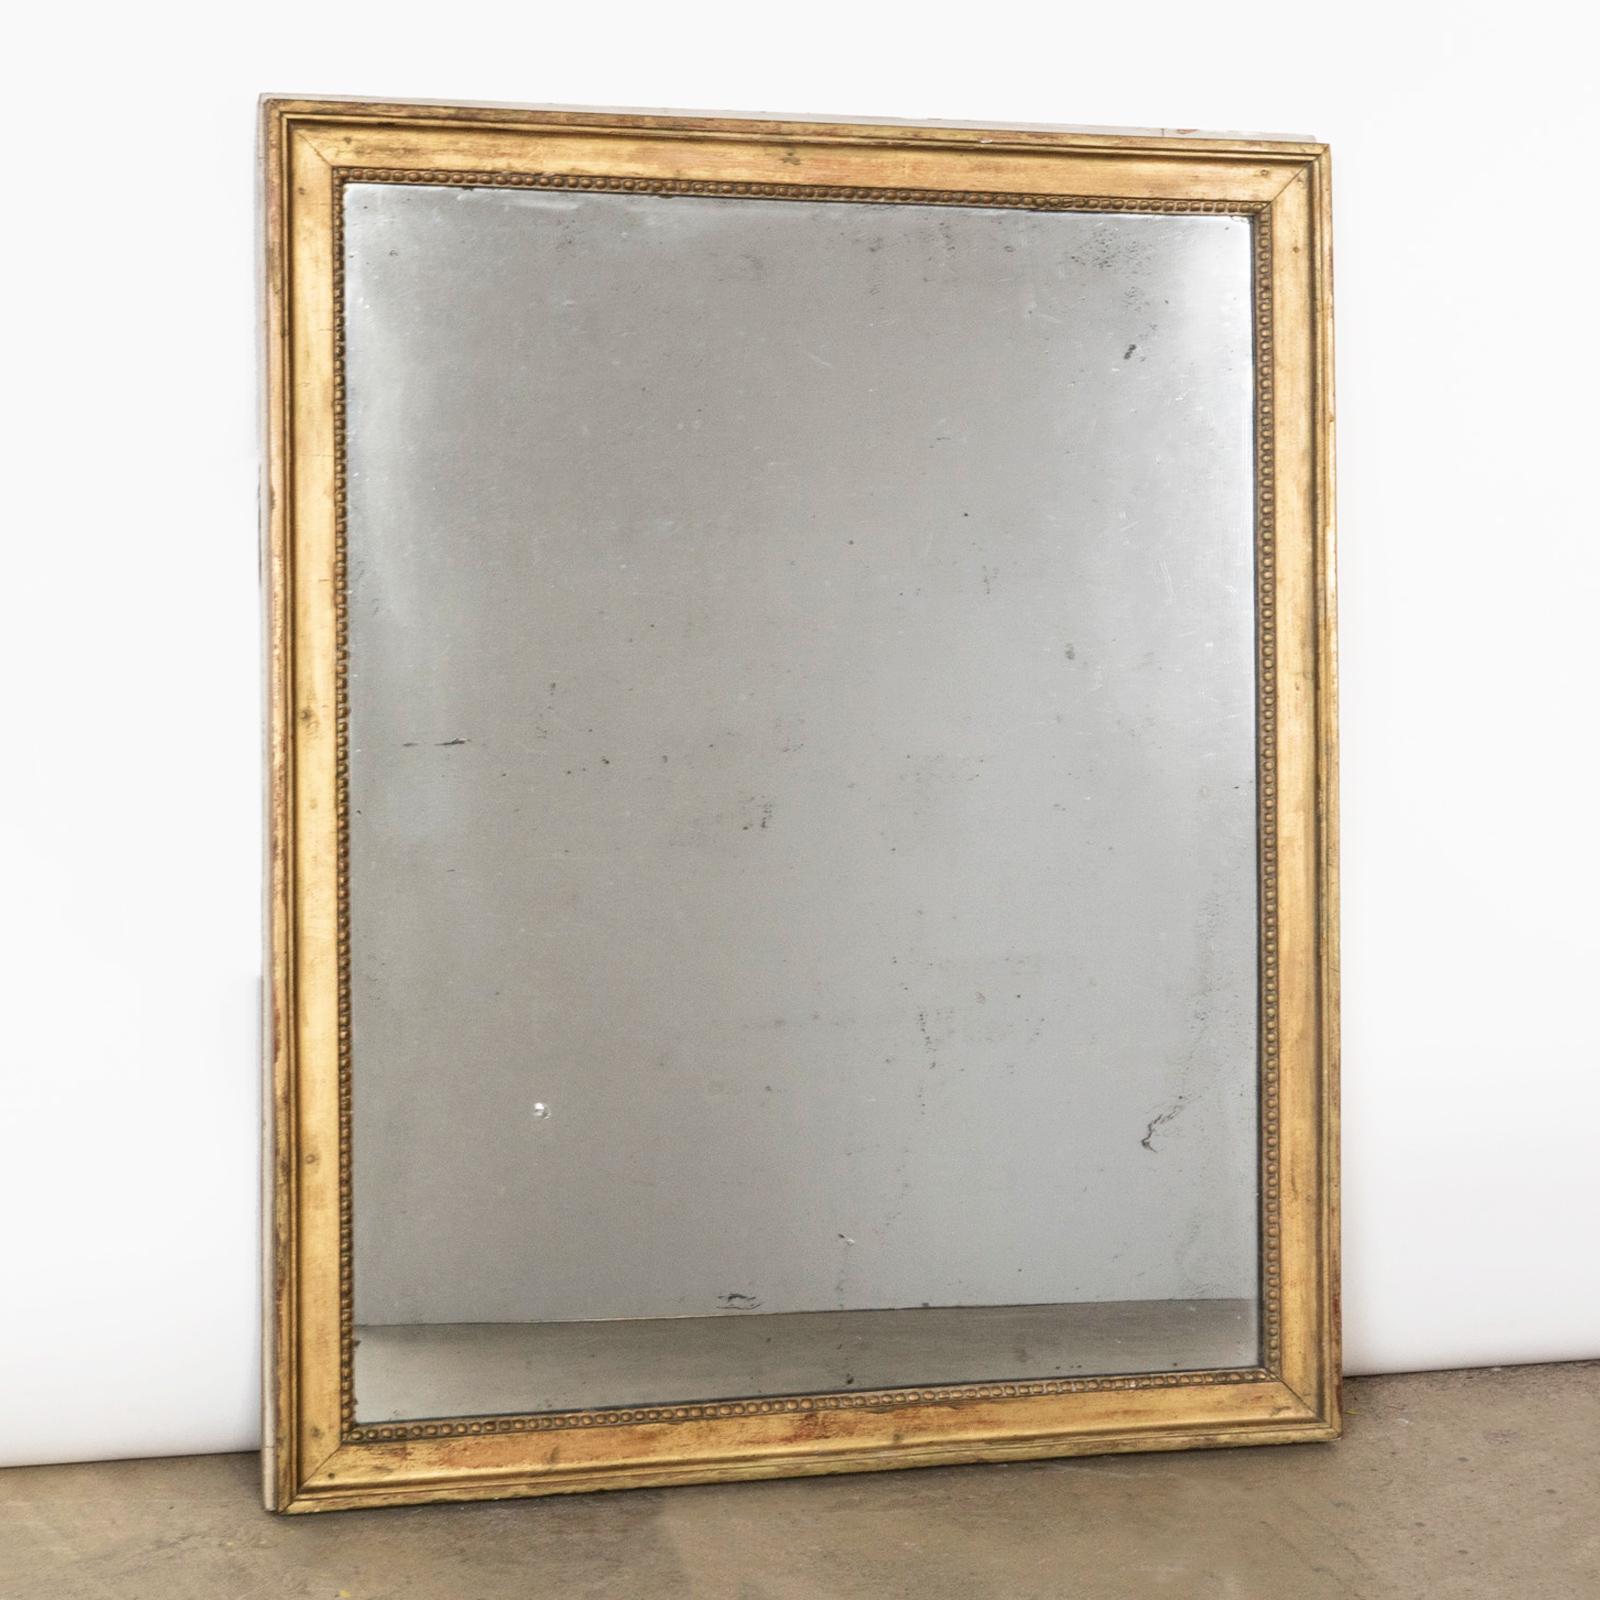 Wonderful French 19th century gilded rectangular mirror.

Beautiful antique rectangular mirror from France. The mirror has a wooden frame, decorated with gesso and gilded with gold leaf. A delicate pearl beading surrounds the glass.

The mirror